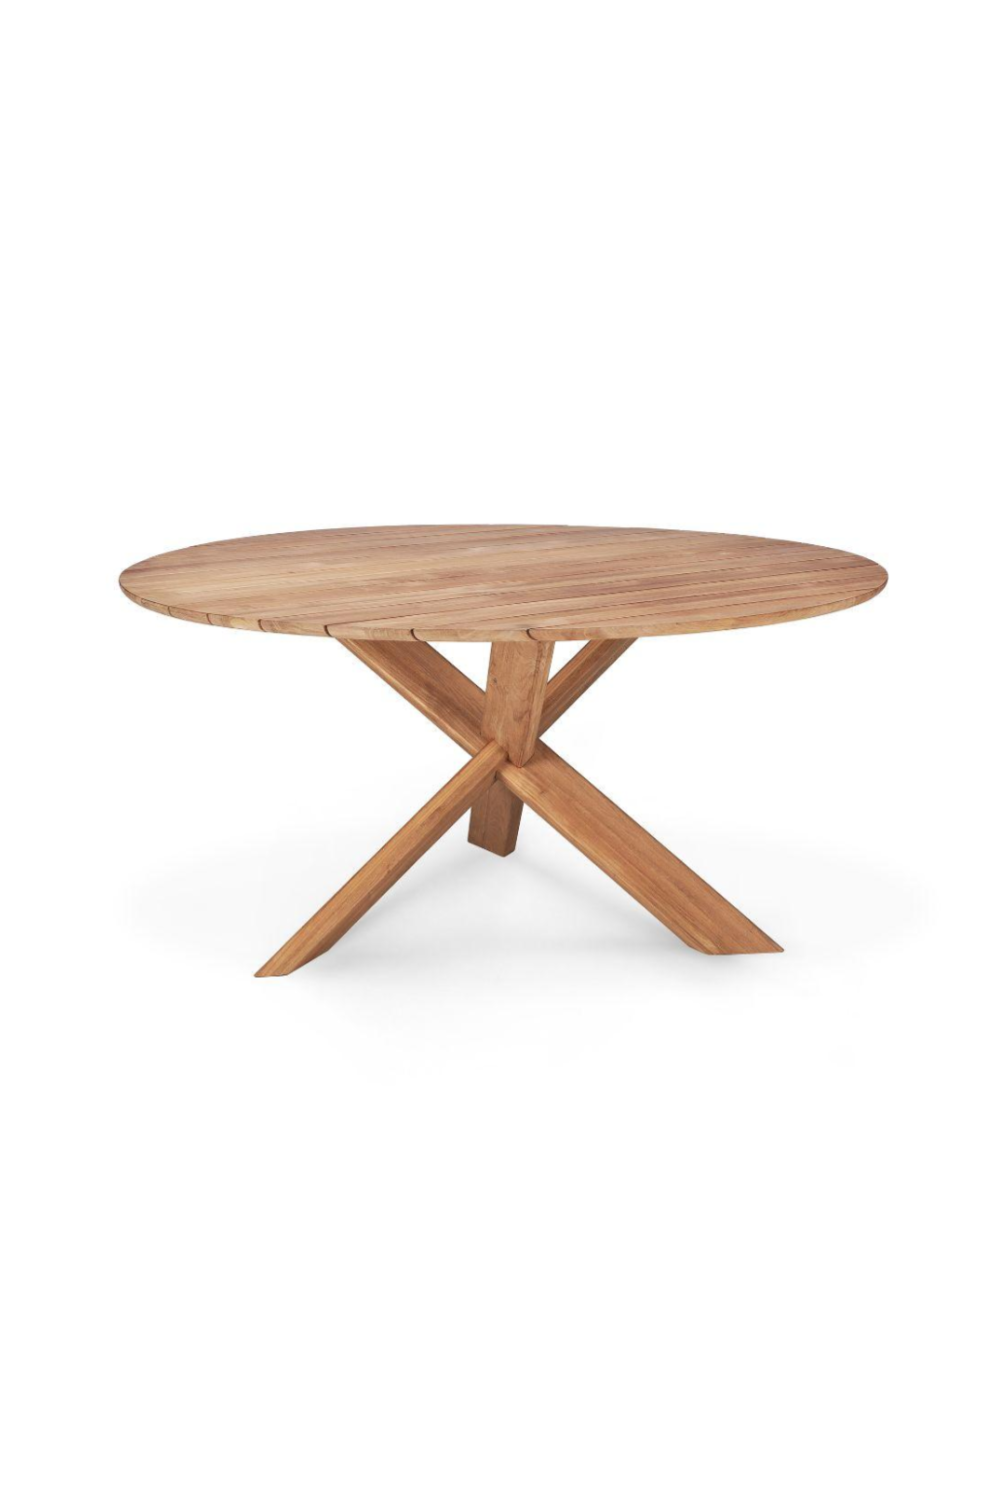 Solid Teak Outdoor Dining Table | Ethnicraft Circle | OROA.com